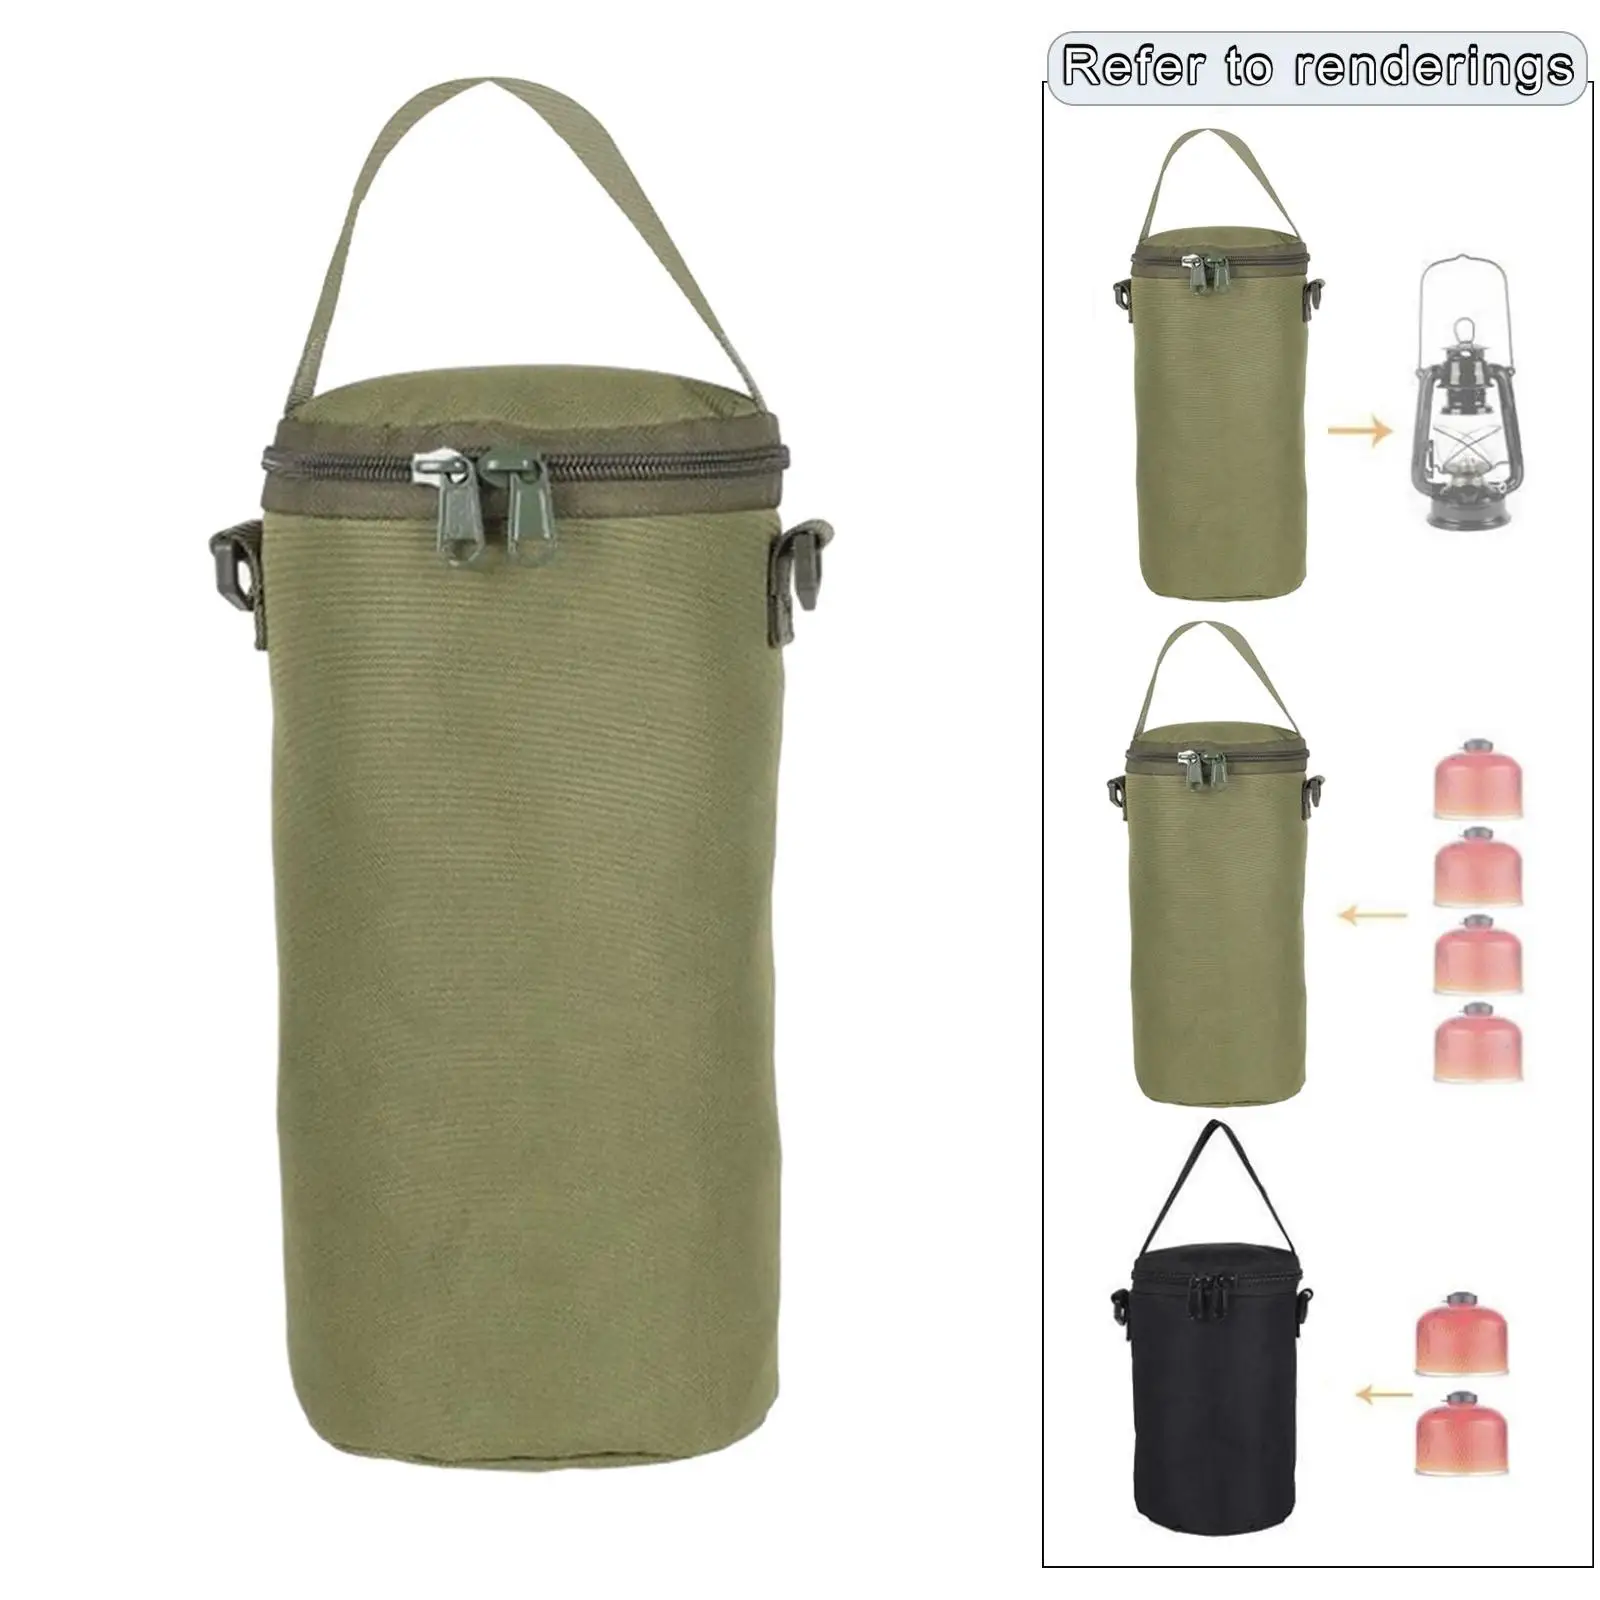 2x Gas Storage Bag Anti-Collision Gas Cylinder Lantern Protective Cover  for Camping Outdoor